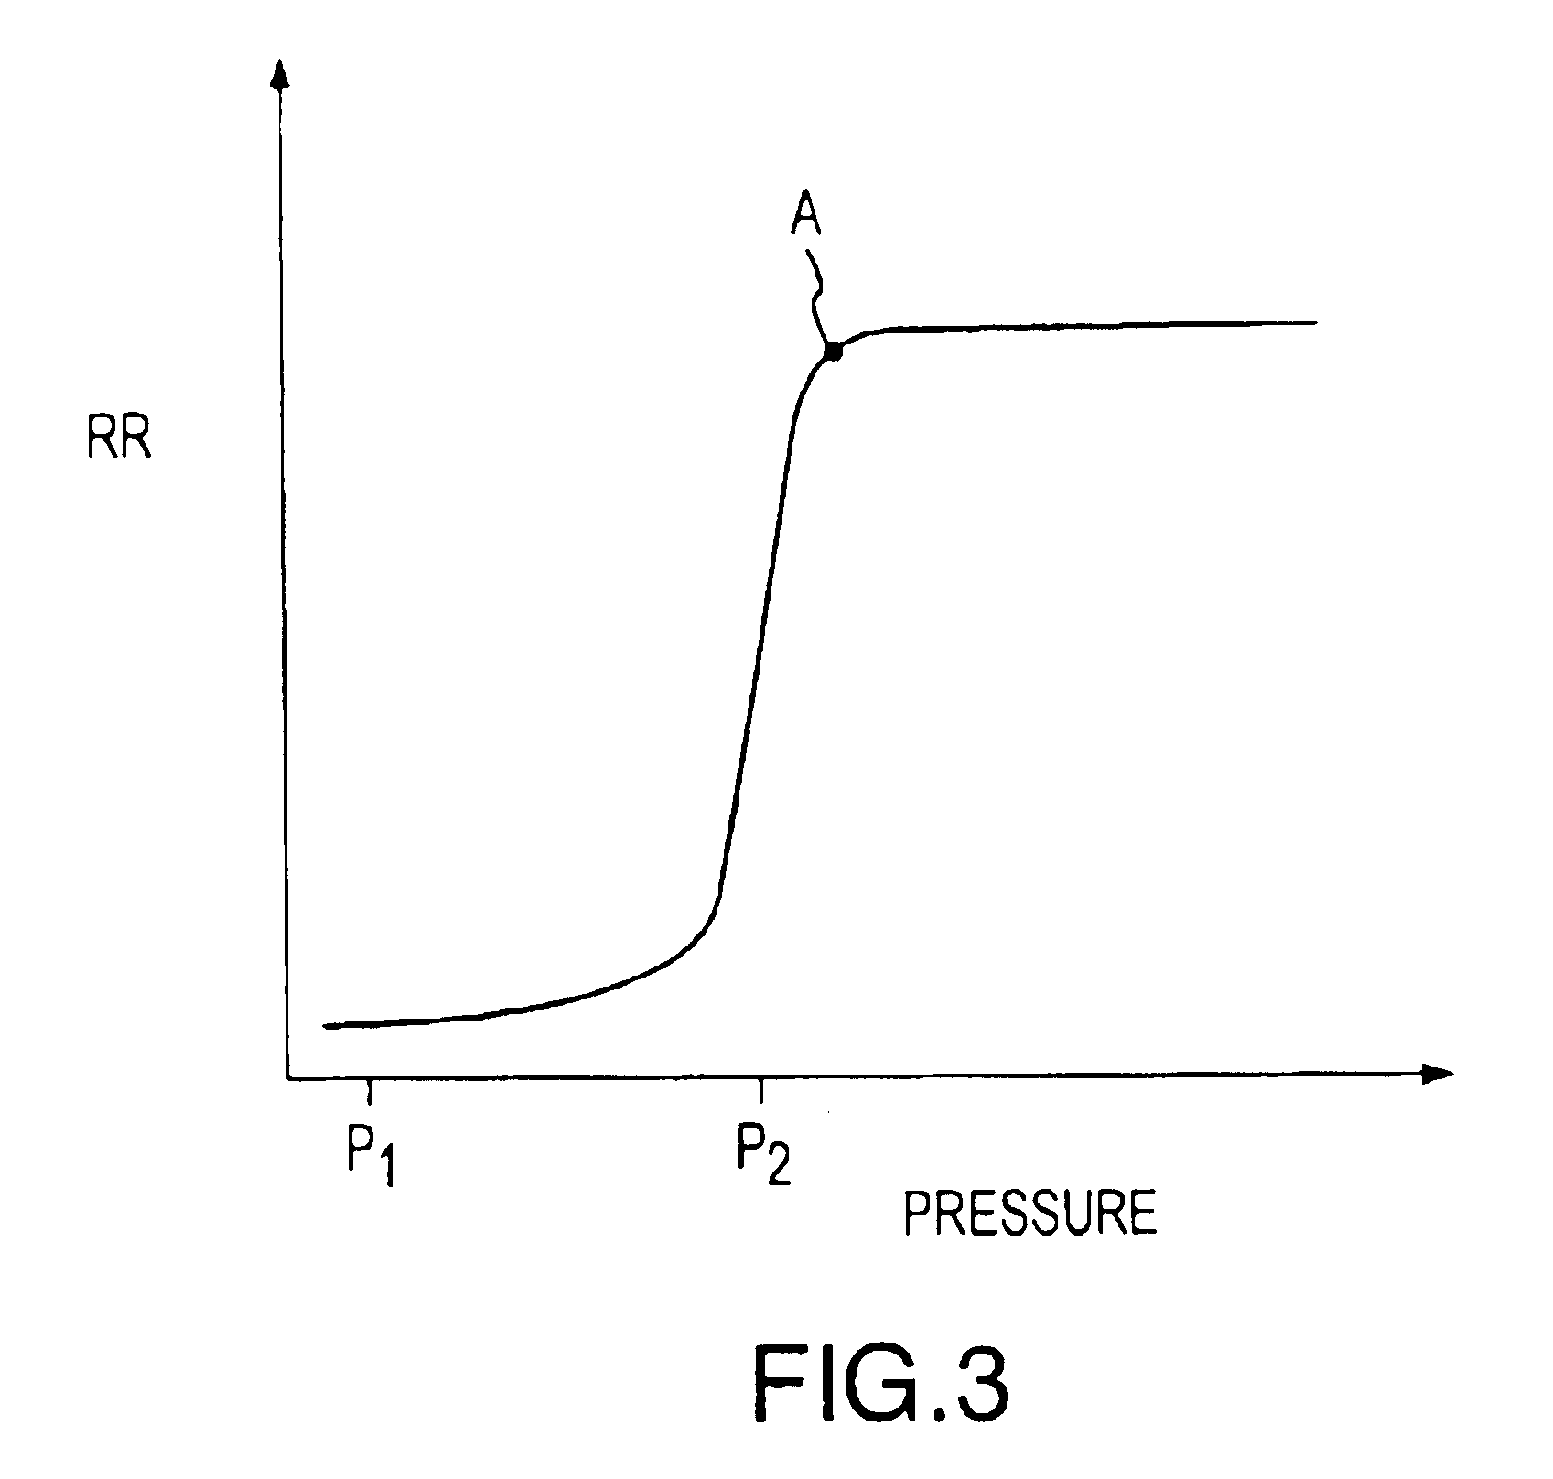 Apparatus and process for polishing a workpiece